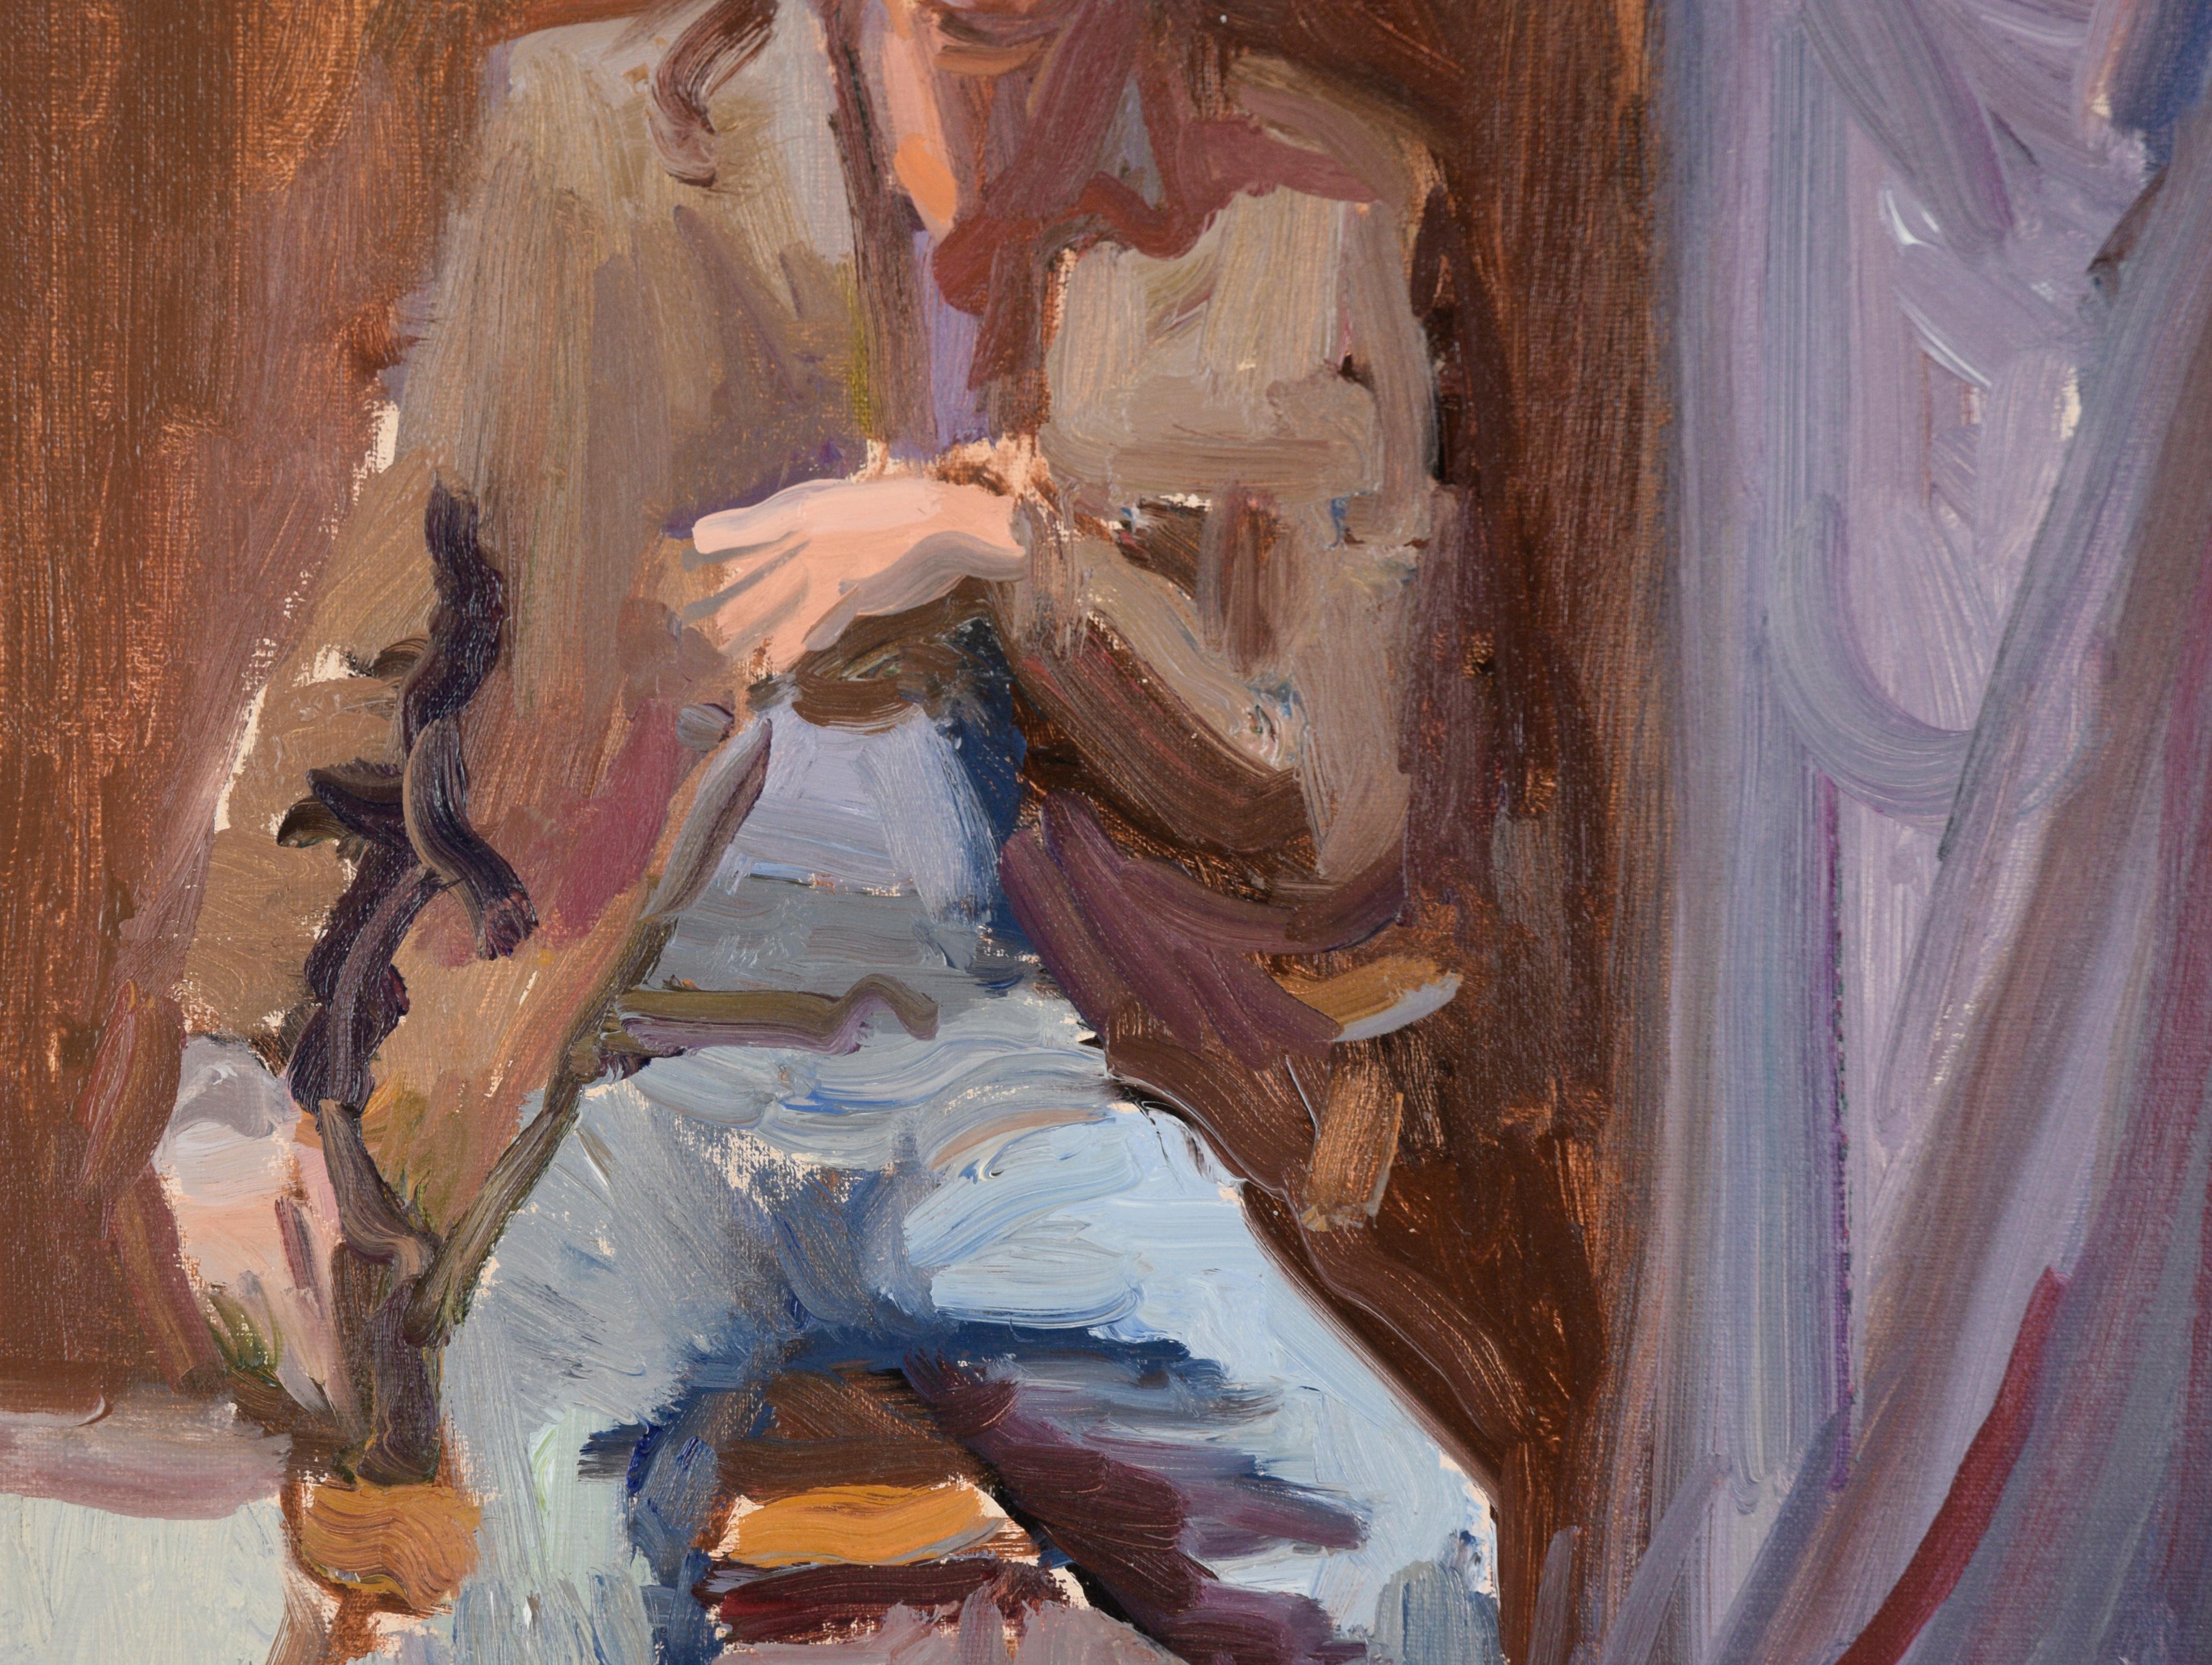 Portrait of a Seated Man in Jeans and a Sport Coat in Oil on Canvas

Modern impressionist portrait by an unknown artist (20th Century). A man is seated on a wood chair, wearing jeans, a sport coat, and a blue beret. The piece is executed with